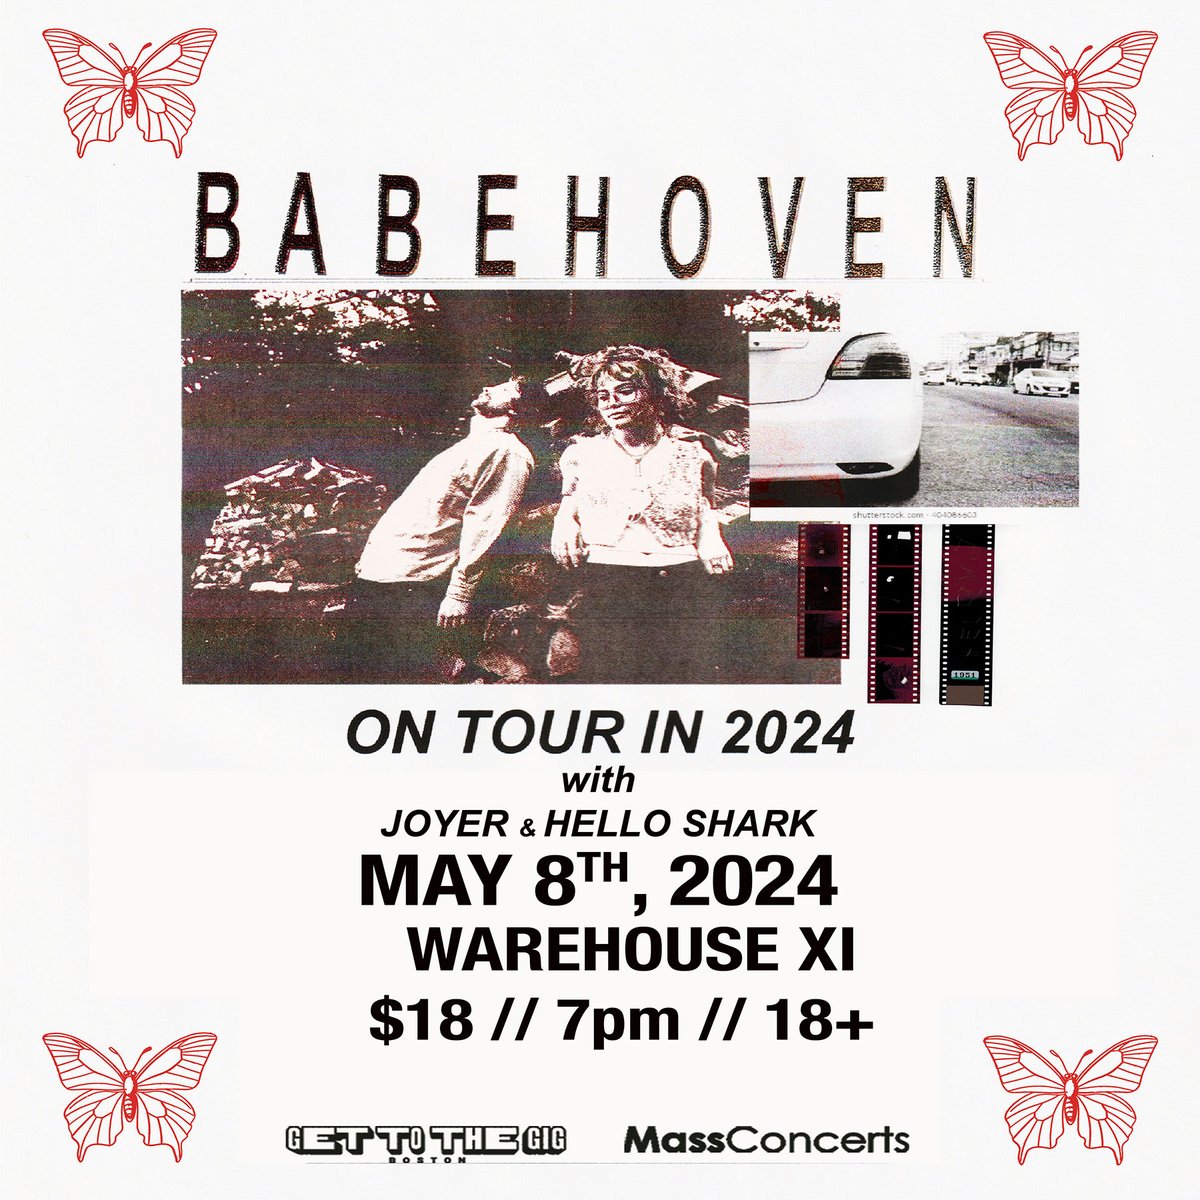 The @babehoven show in 1 WEEK with @joyerband & Hello Shark has been moved to @WarehouseXI! All tickets purchased before the venue changed will still be valid at Warehouse XI 🎟 STILL available HERE: seetickets.us/event/babehove…